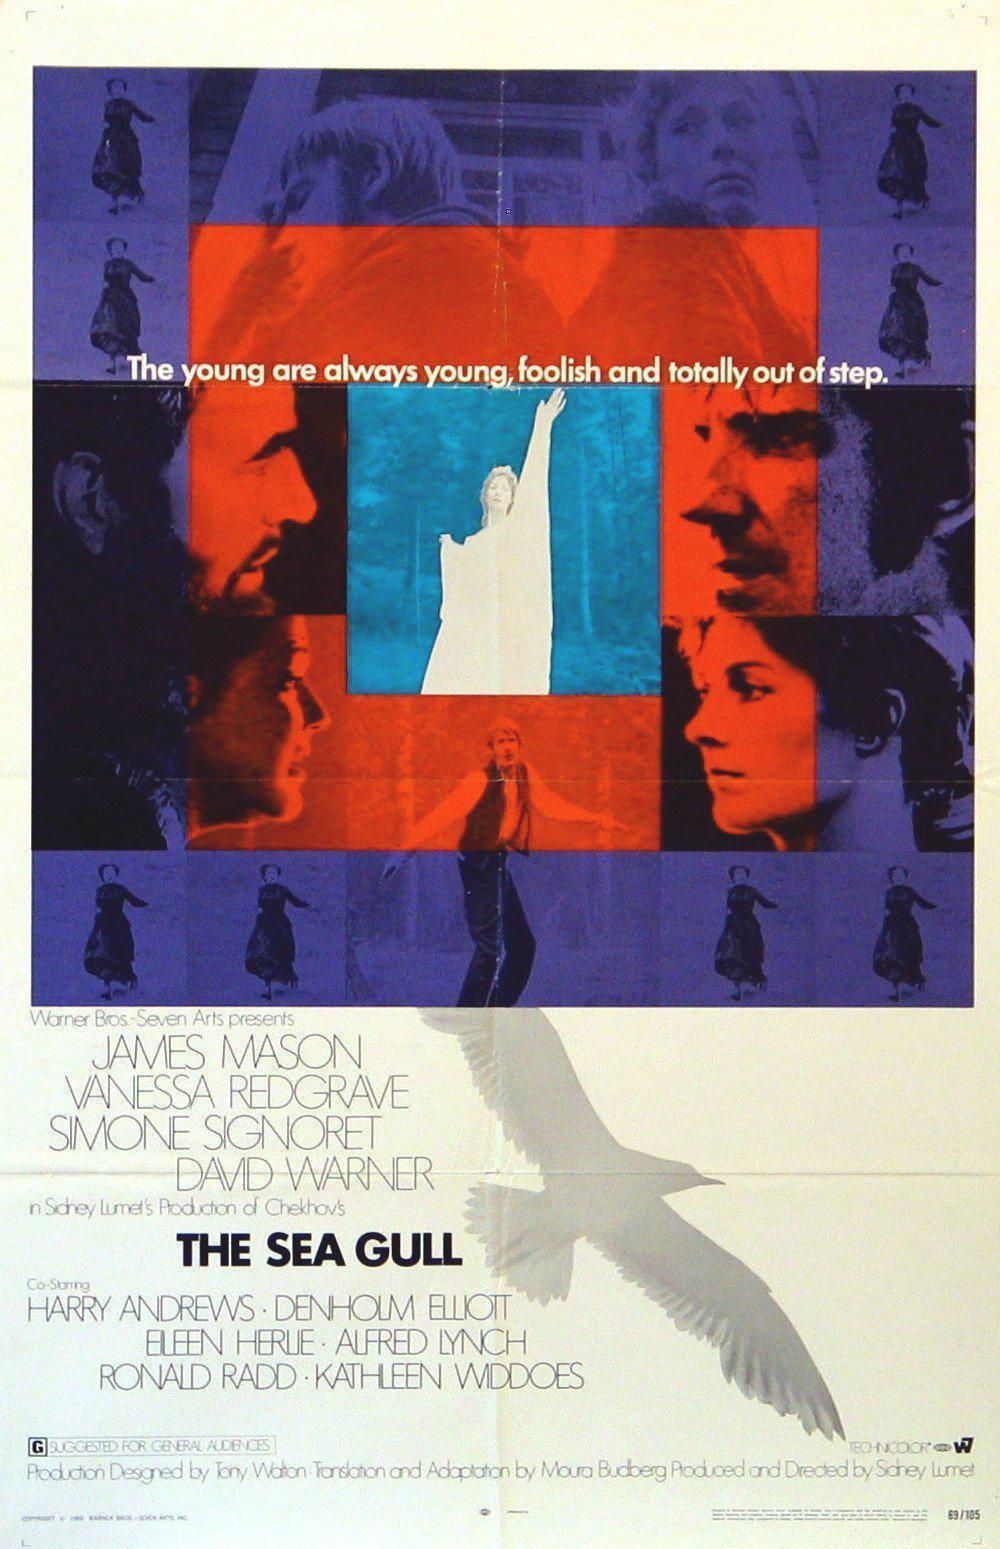 The Seagull 1 Sheet (27x41) Original Vintage Movie Poster